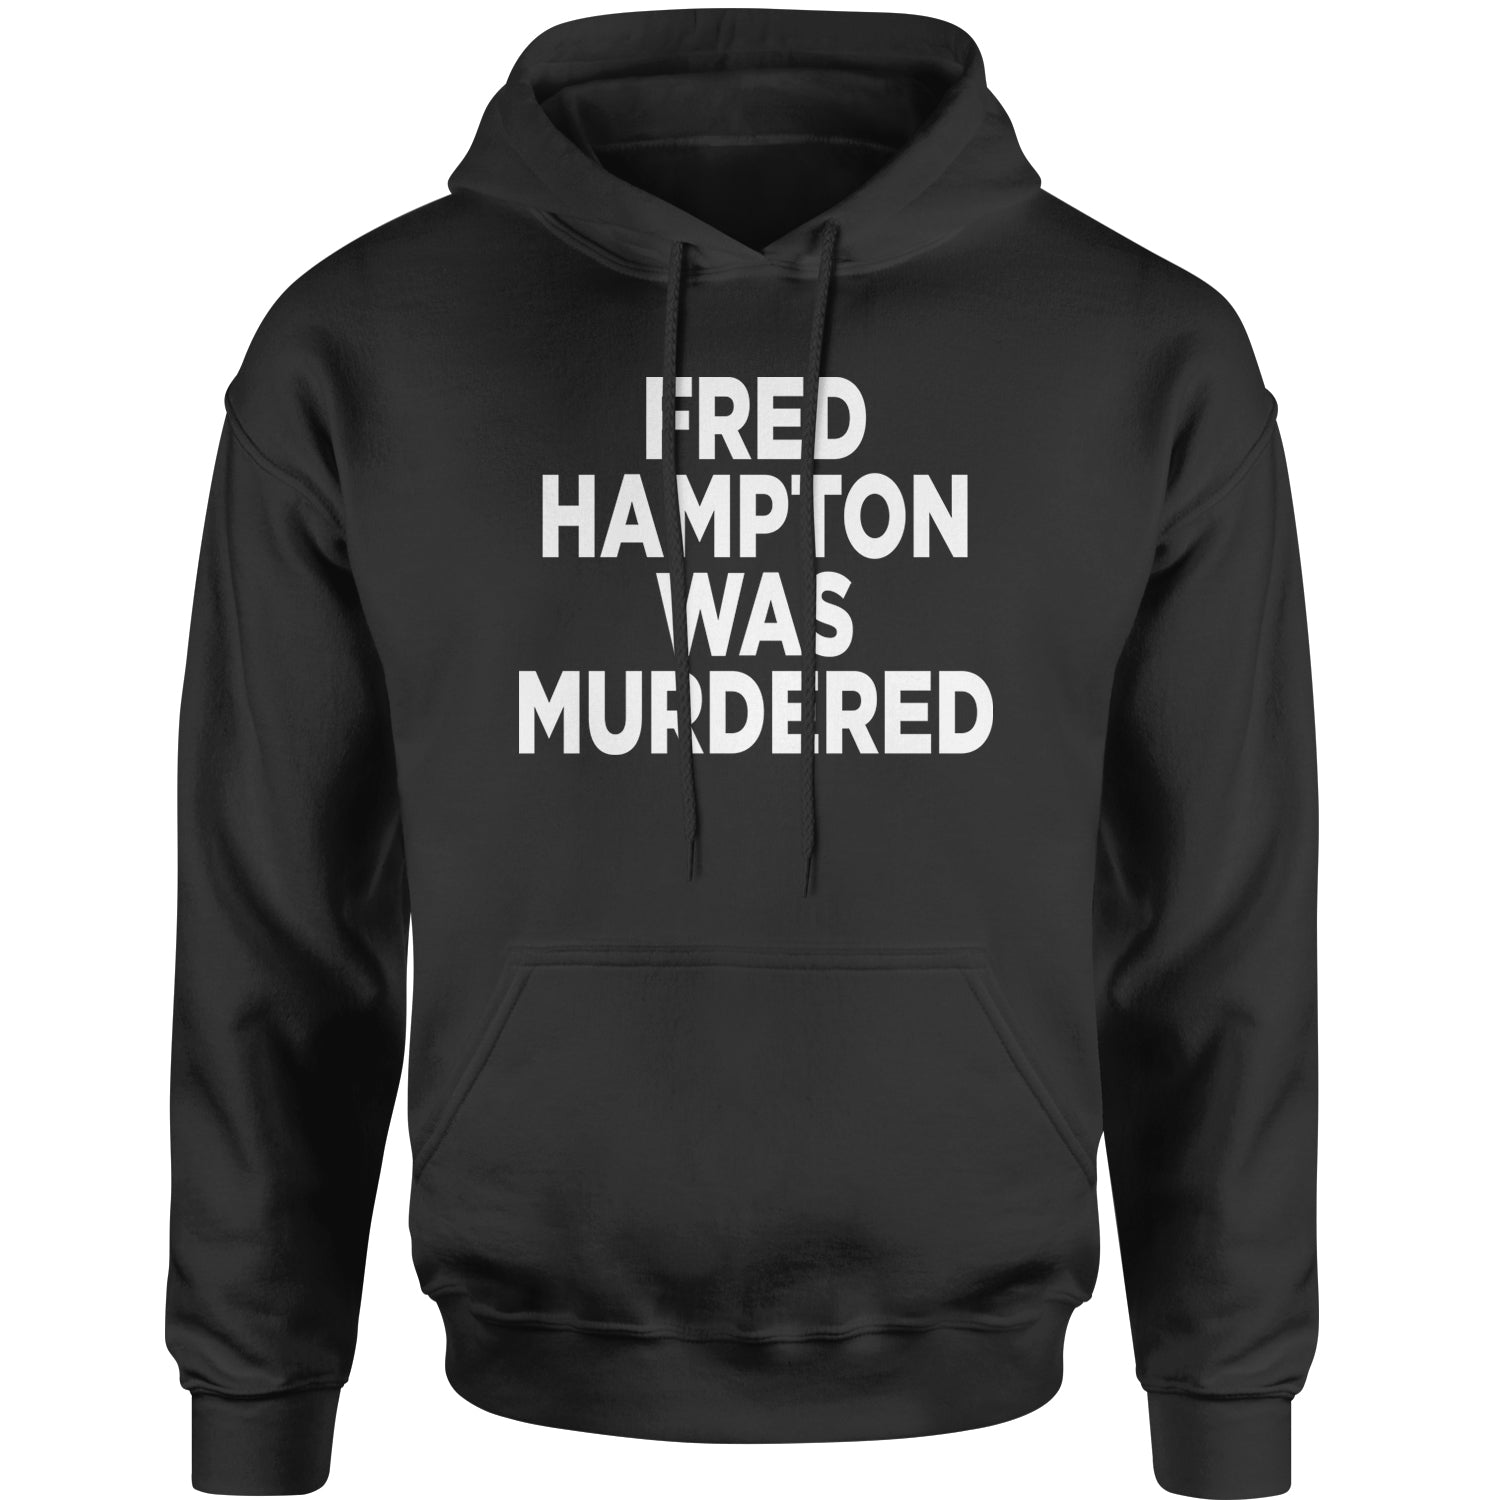 Fred Hampton Was Murdered Adult Hoodie Sweatshirt activism, african, africanamerican, american, black, blm, brutality, eddie, lives, matter, murphy, people, police, you by Expression Tees